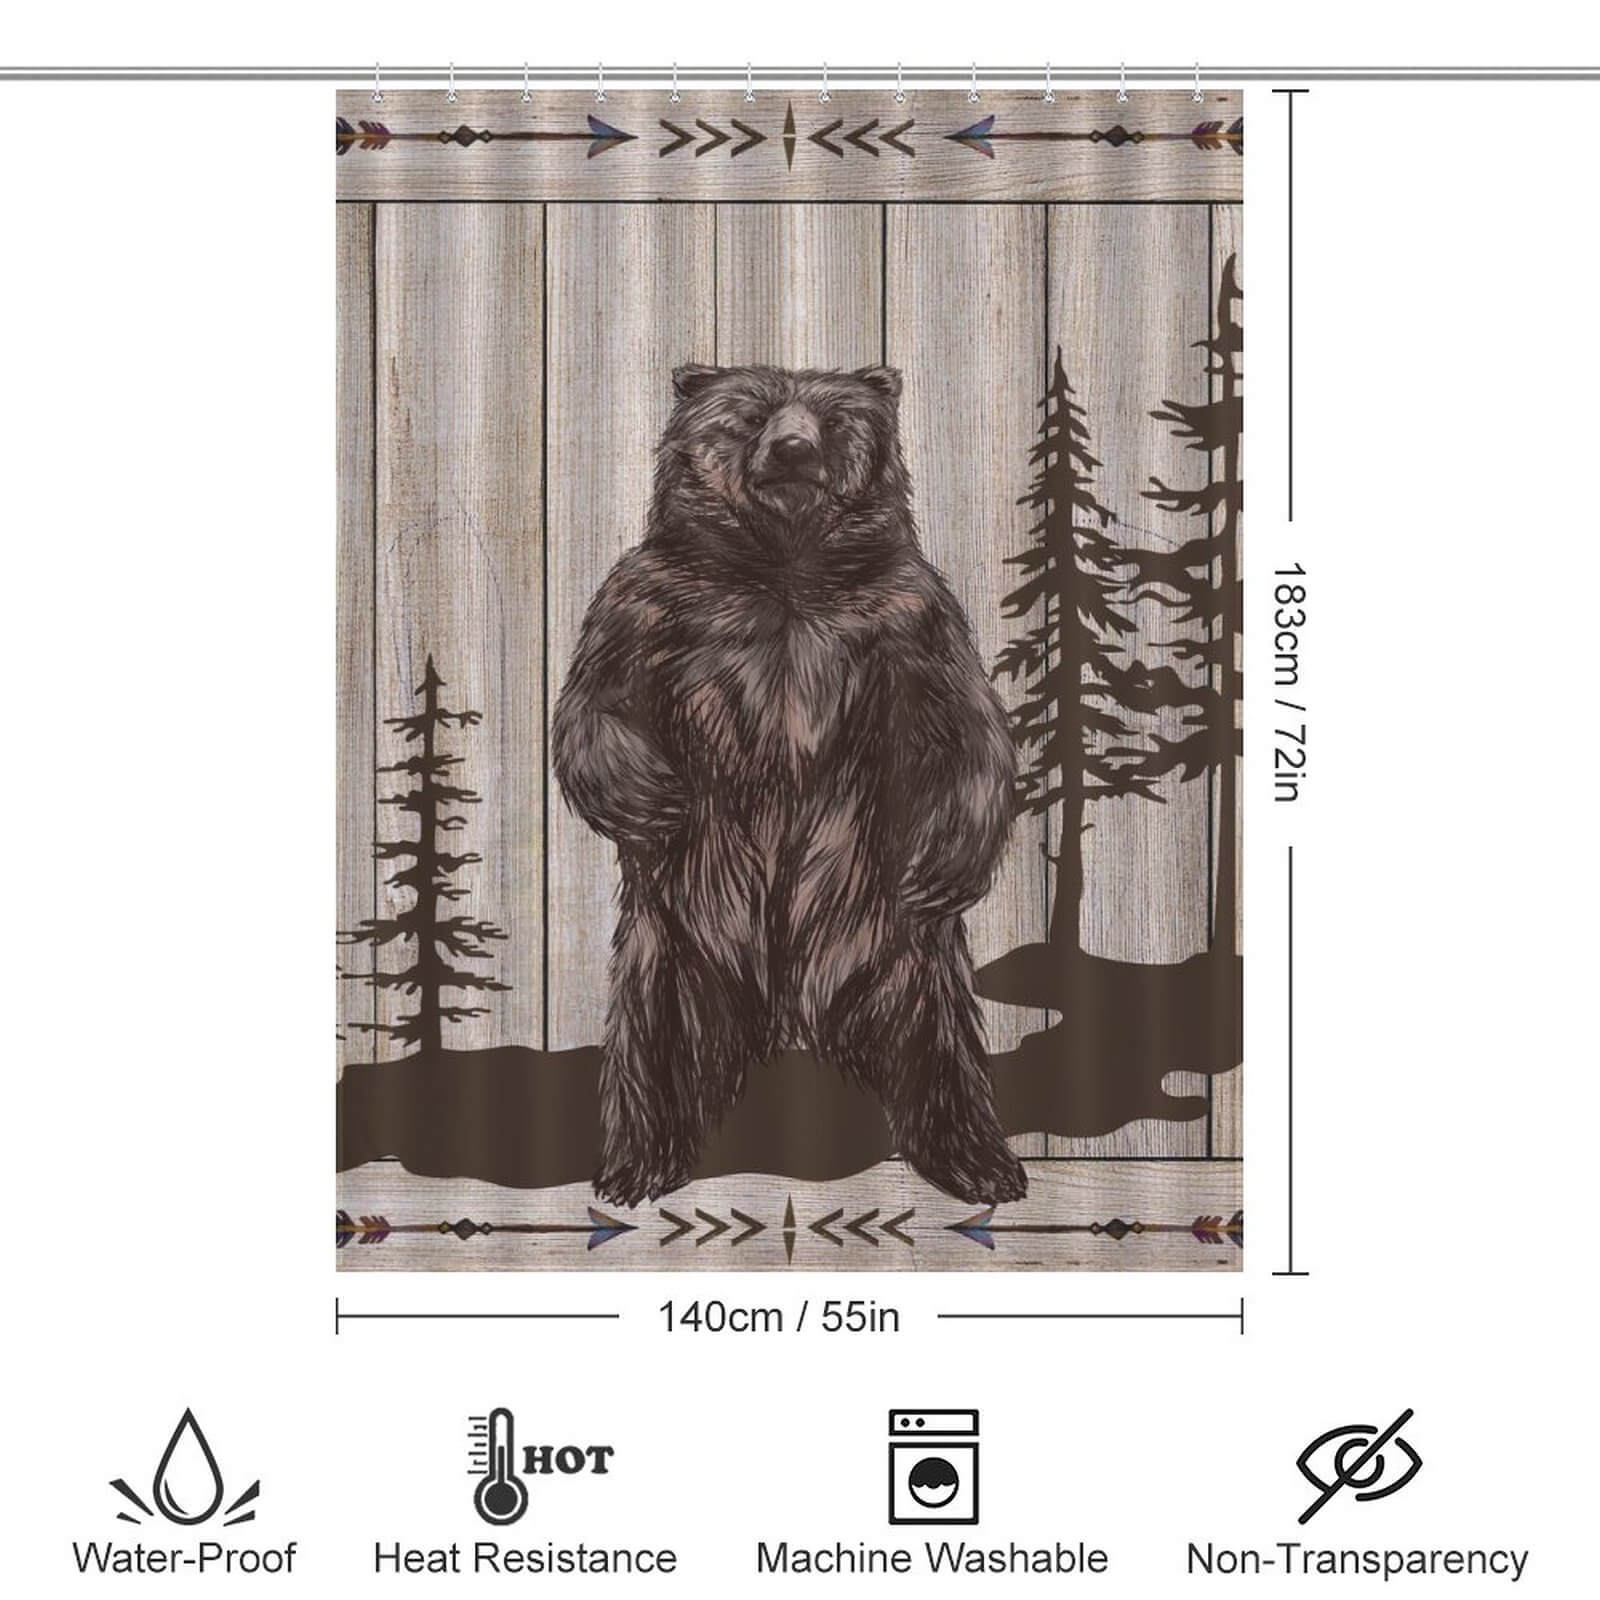 Step into the bathroom and embrace nature with our Farmhouse Wood Bear Shower Curtain by Cotton Cat. Crafted from 100% polyester, this waterproof curtain features a lifelike depiction of a majestic bear.